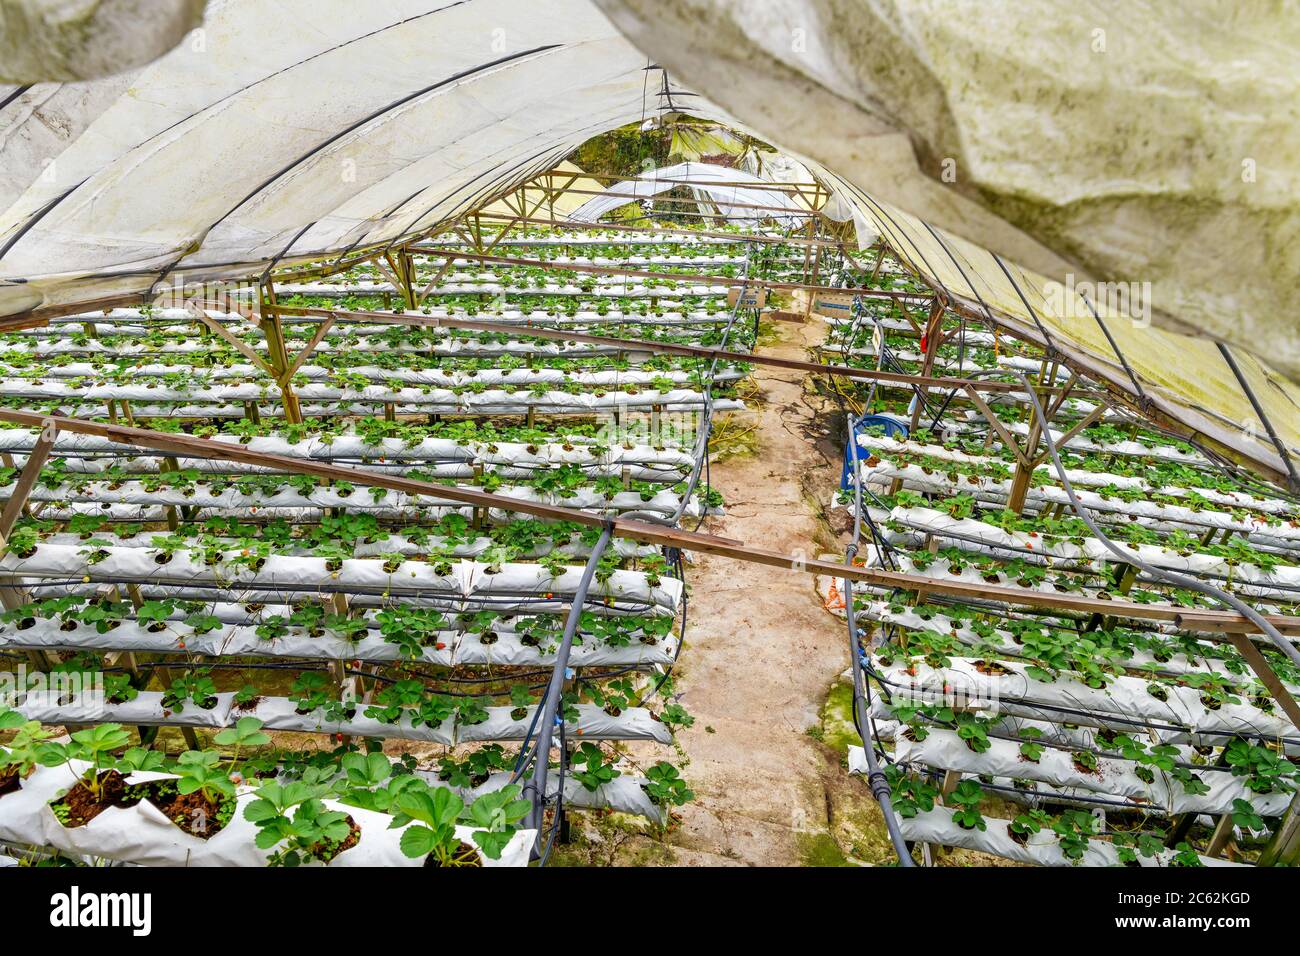 Strawberries growing in polytunnels in Brinchang, Cameron Highlands, Malaysia Stock Photo